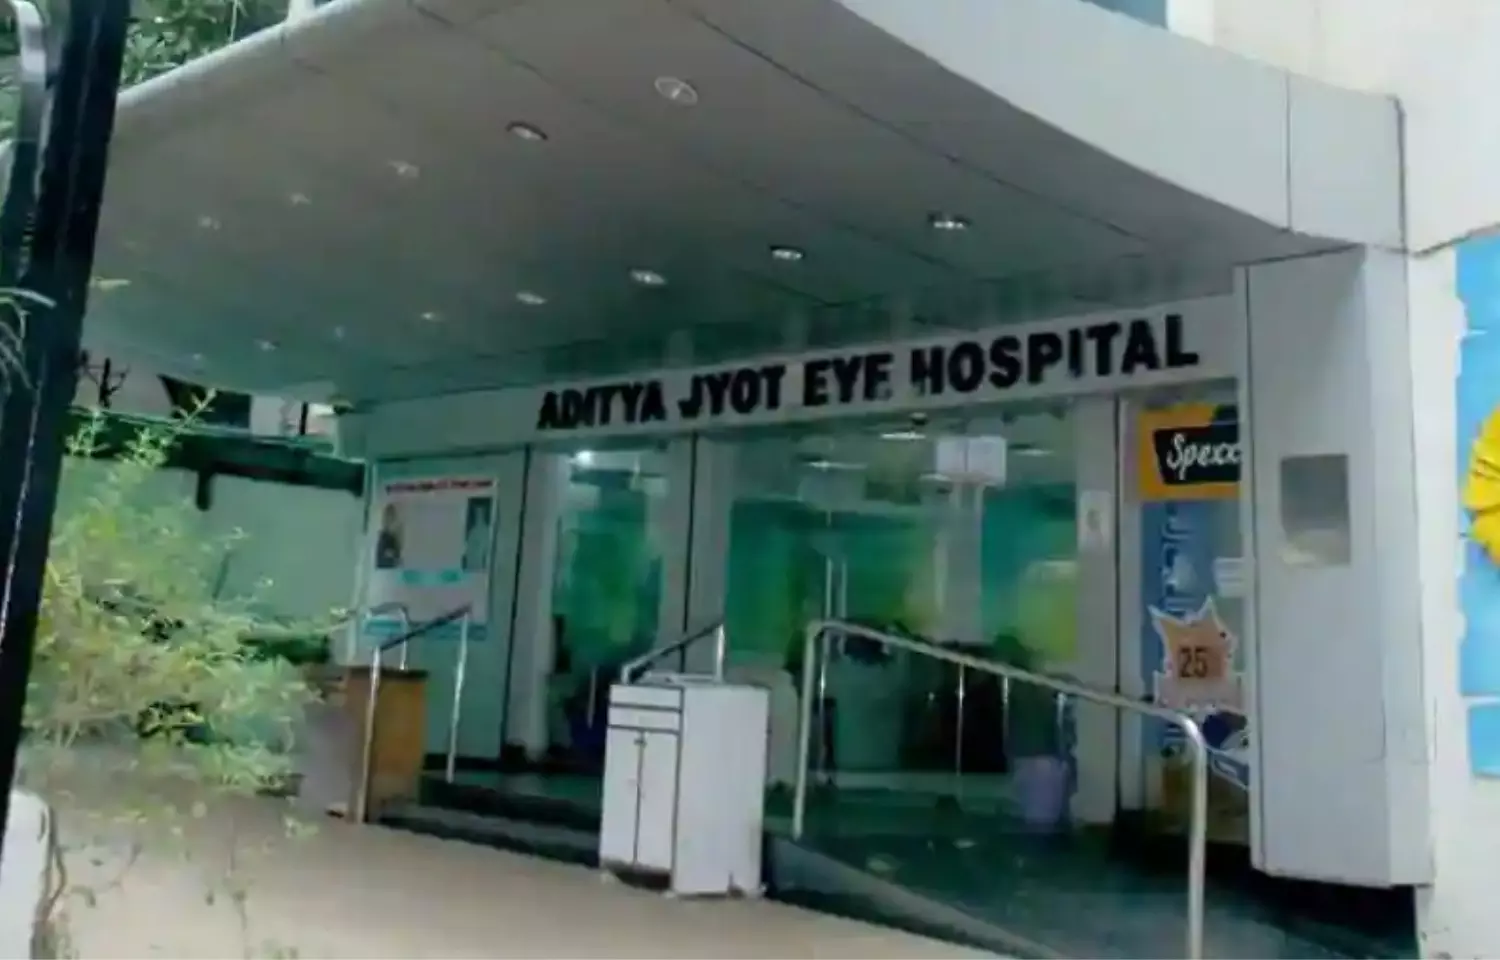 Dr Agarwals to invest over Rs 300 crore to set up 20 eye hospitals in Maharashtra